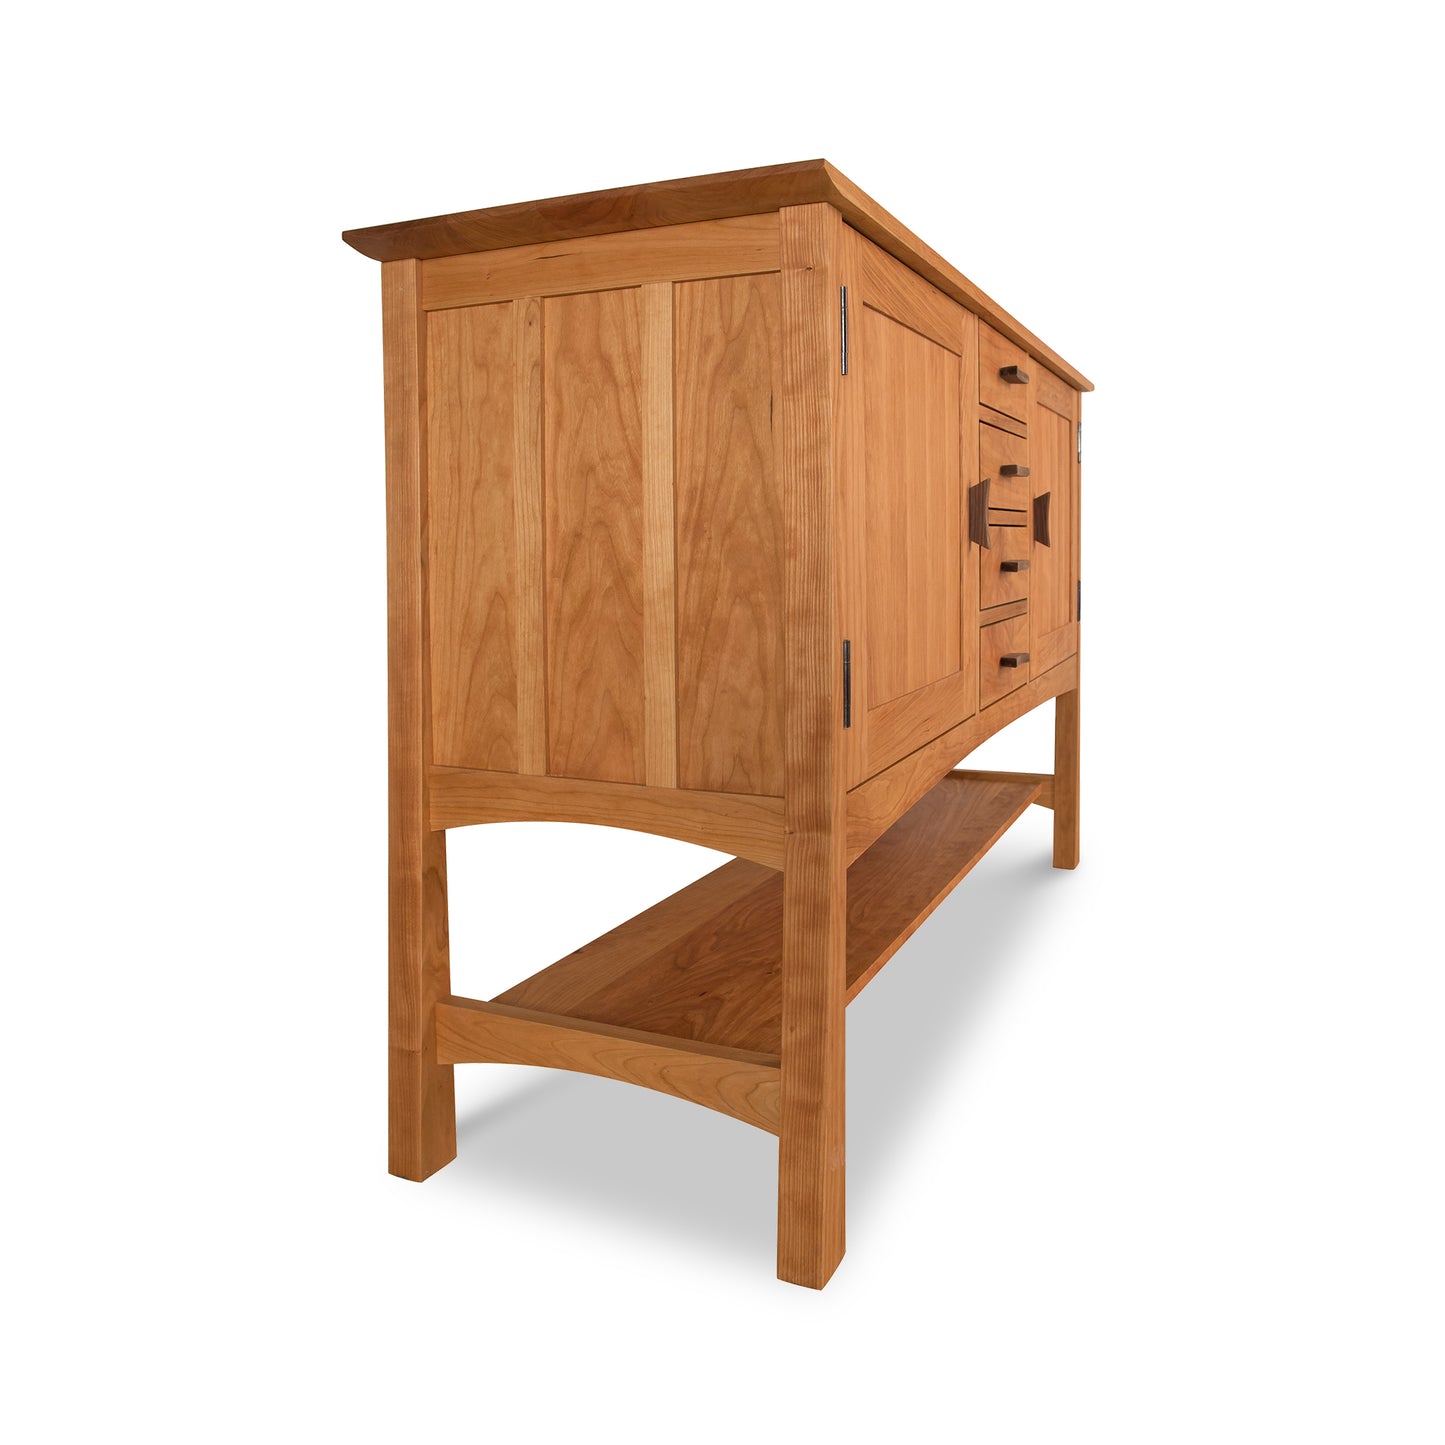 A Vermont Furniture Designs Contemporary Craftsman Huntboard with cabinets and drawers on a white background, reflecting an Arts & Crafts design.